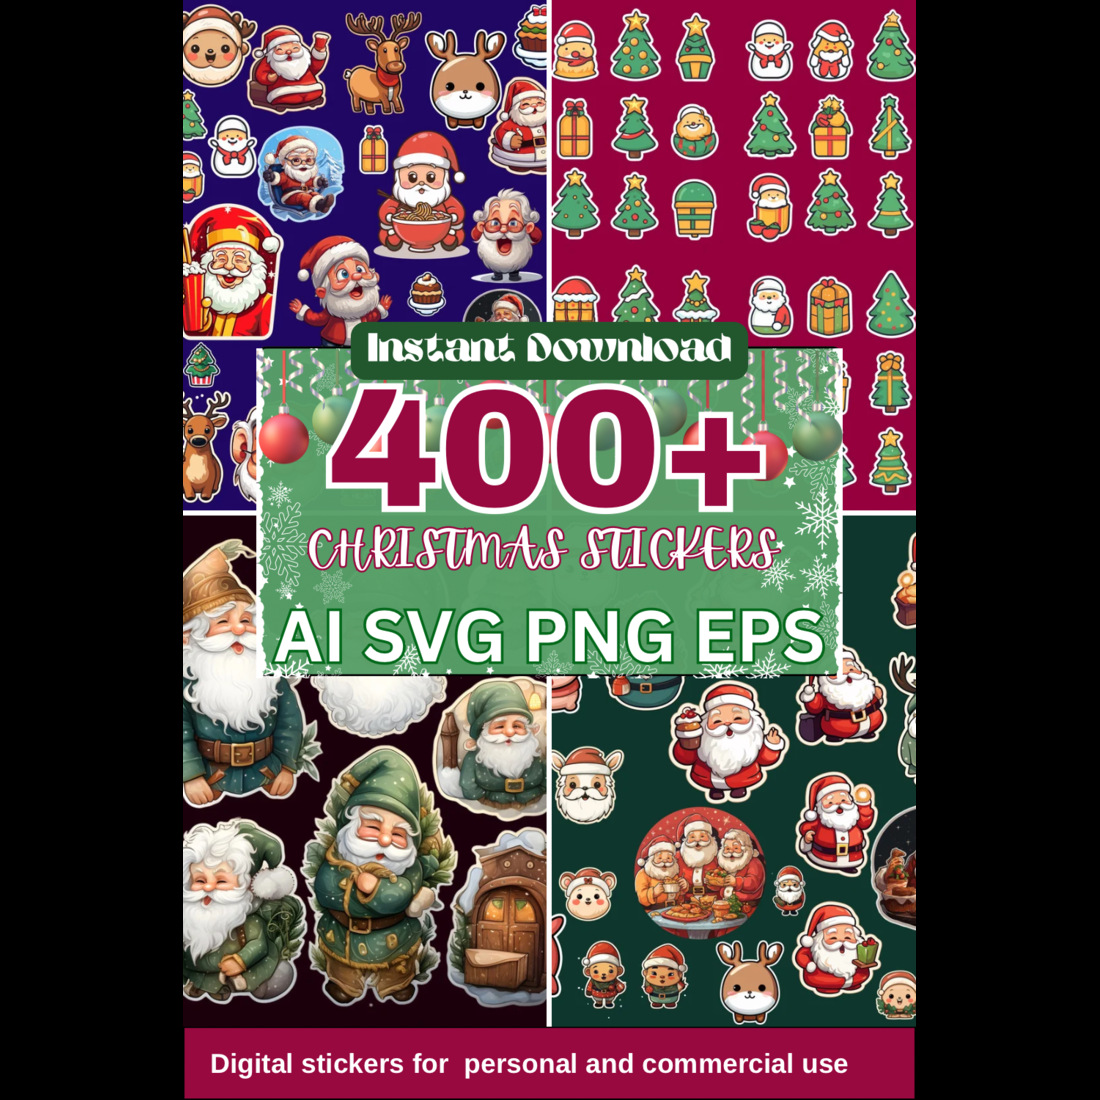 Christmas stickers bundle cover image.